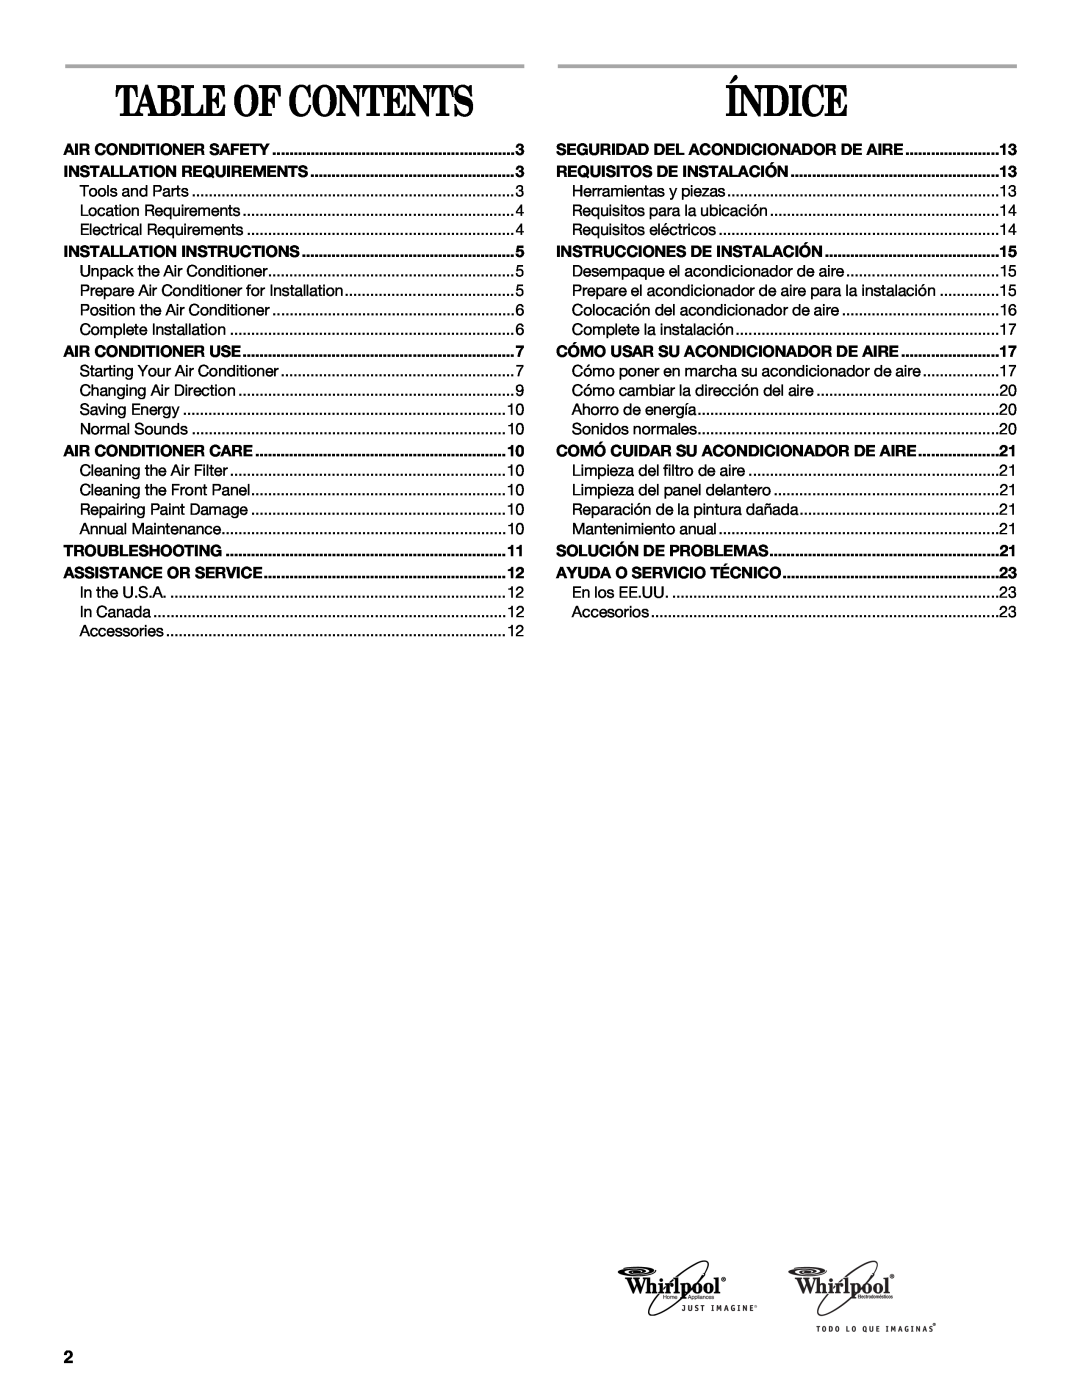 Whirlpool ACQ062MP0 manual Índice, Table Of Contents 